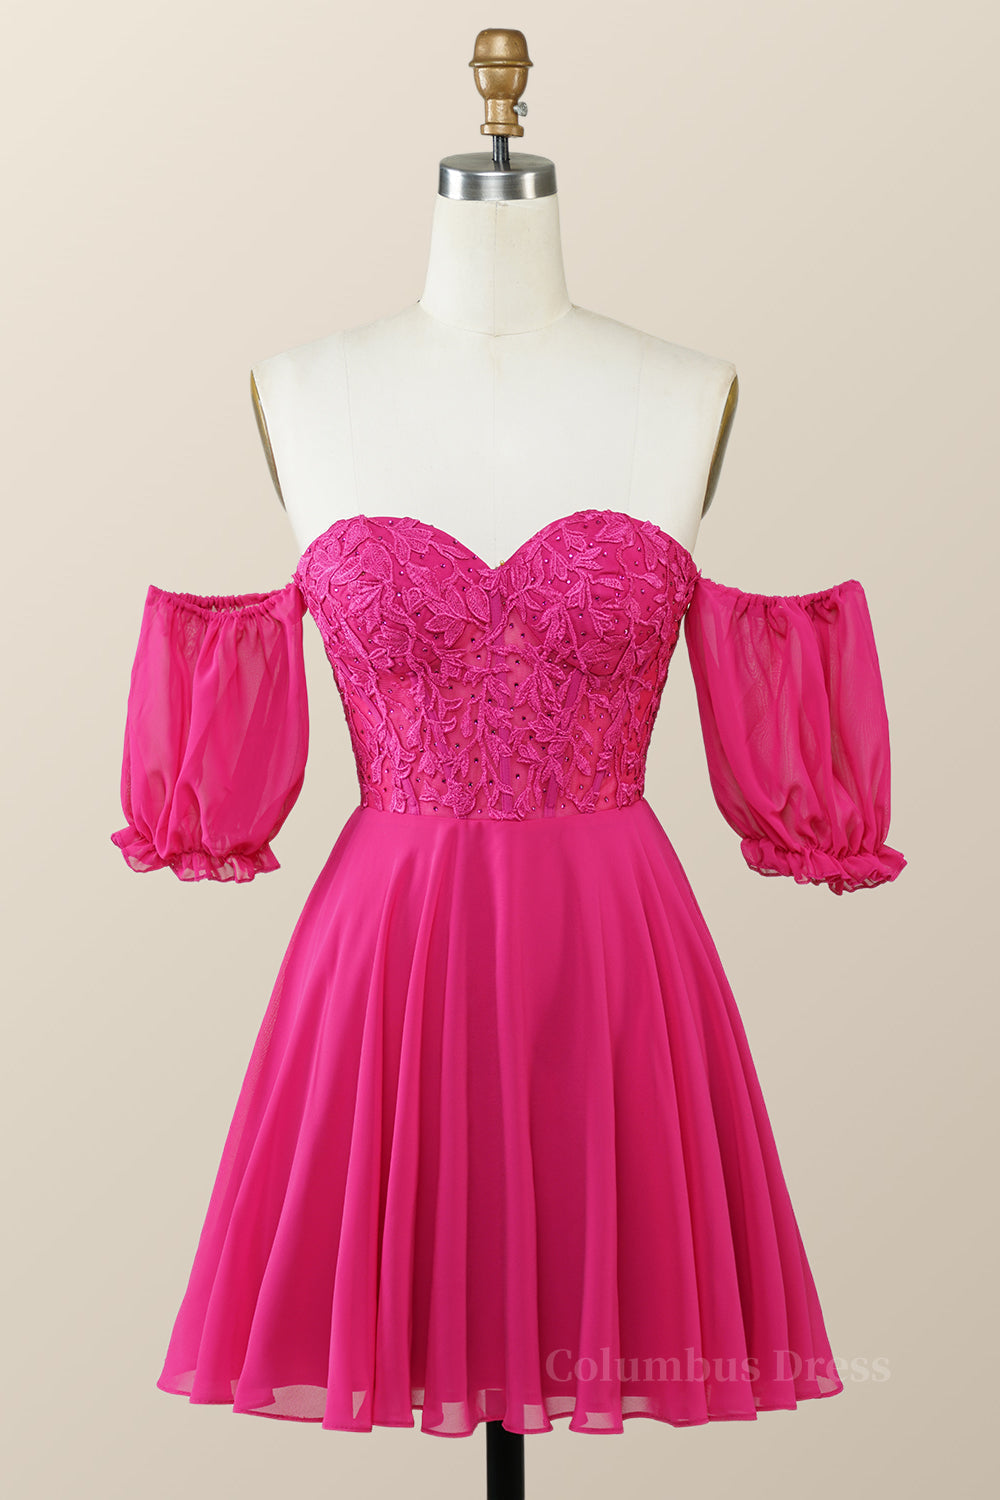 Sweetheart Fuchsia Lace and Chiffon Short Corset Homecoming Dress outfit, Formal Dress For Woman